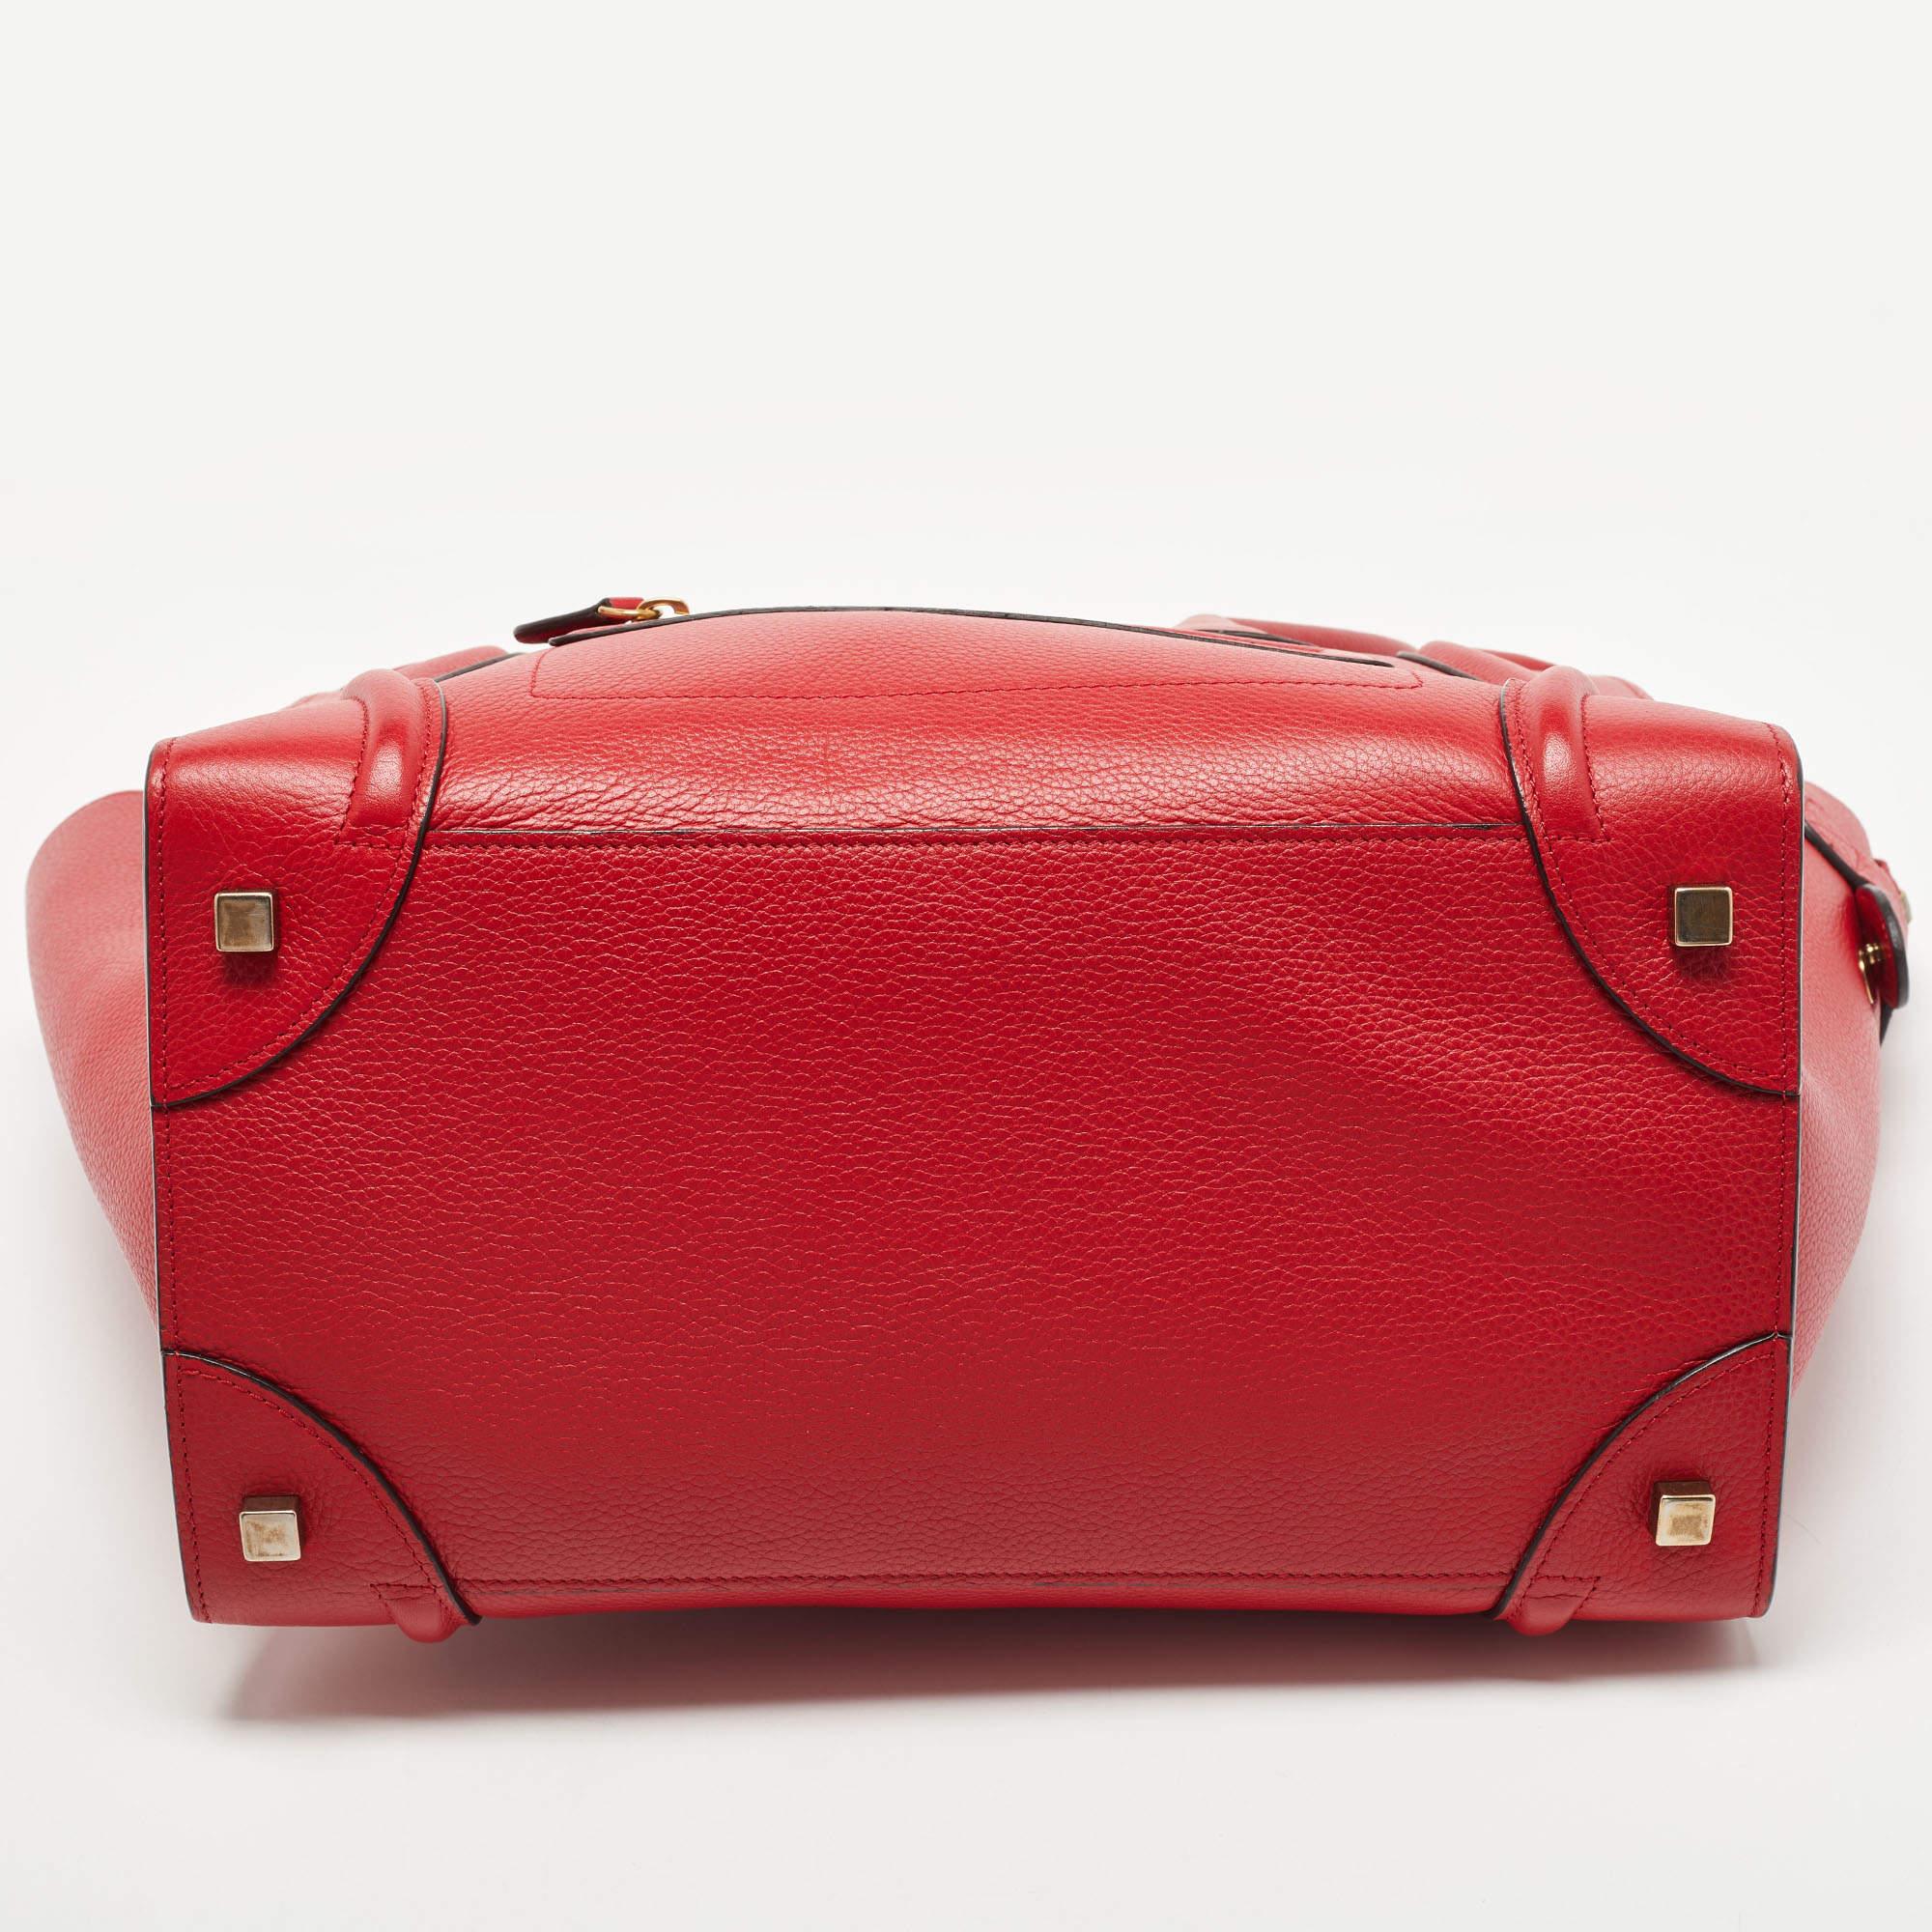 Celine Red Leather Mini Luggage Tote For Sale 1